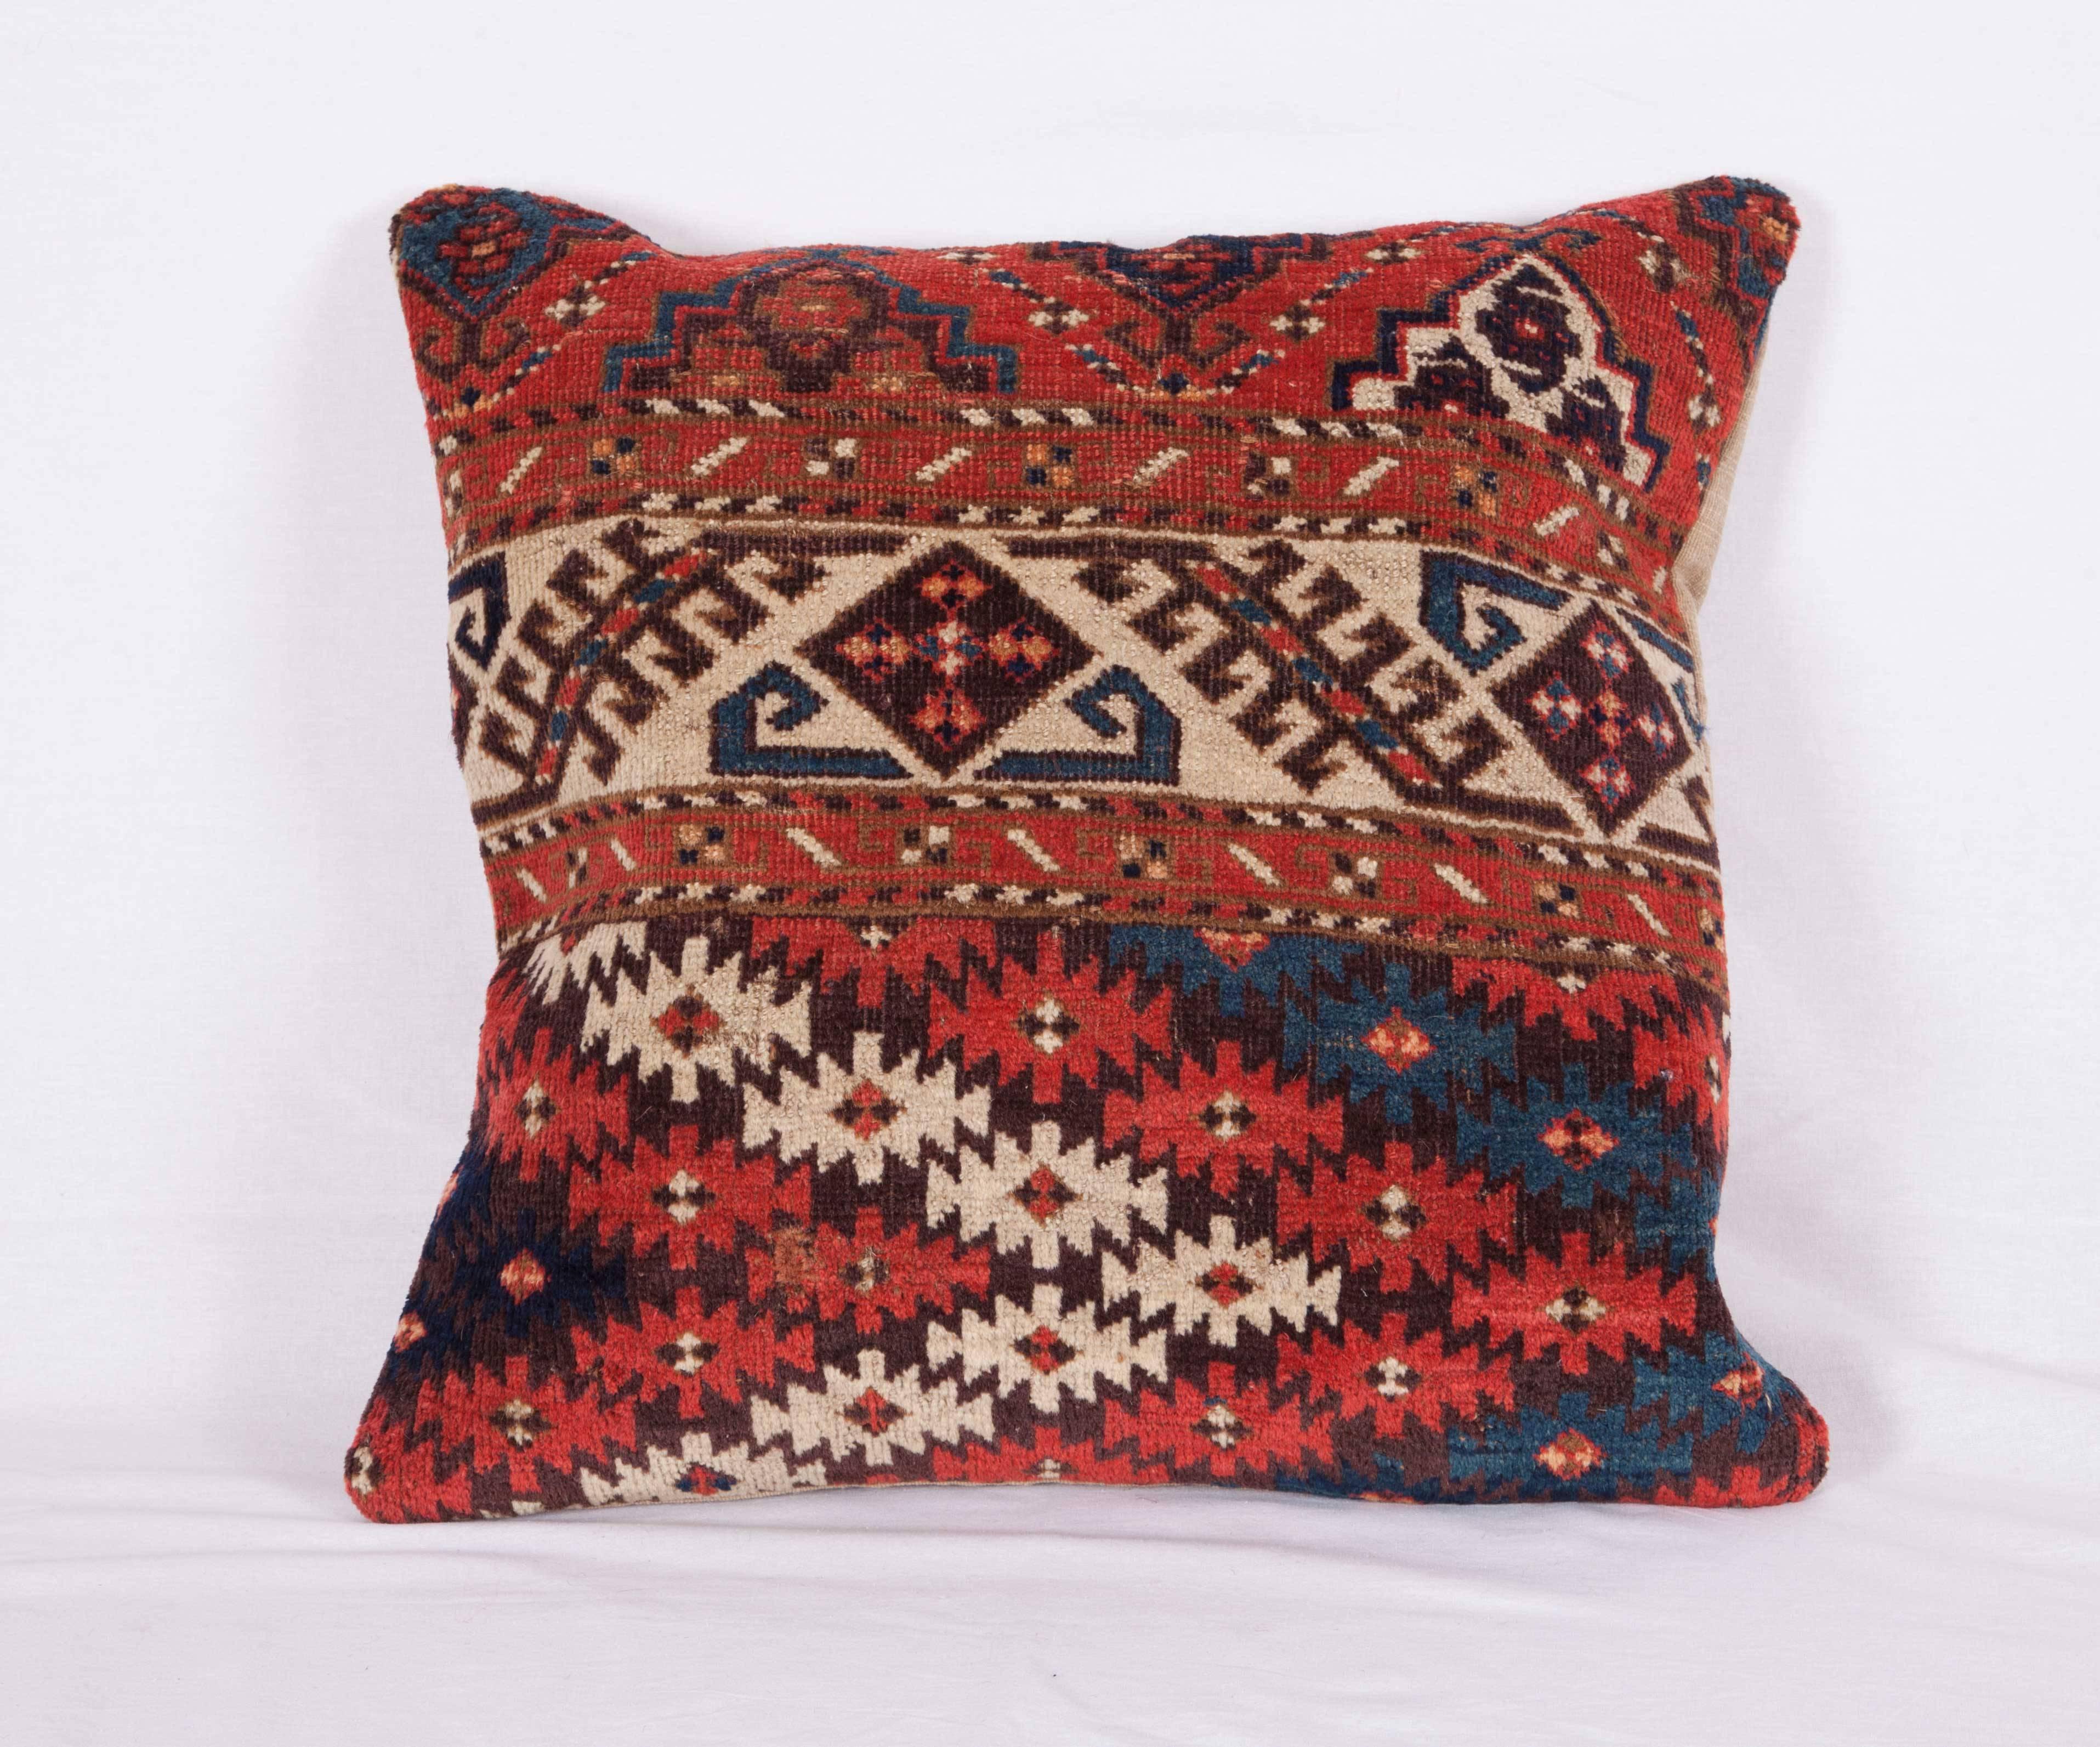 The pillows were made out of a late 19th century, Turkmen Chodor Tribe main rug fragment. It does not come with an insert but it comes with a bag made to the size and out of cotton to accommodate the filling. The backing is made of linen. Please